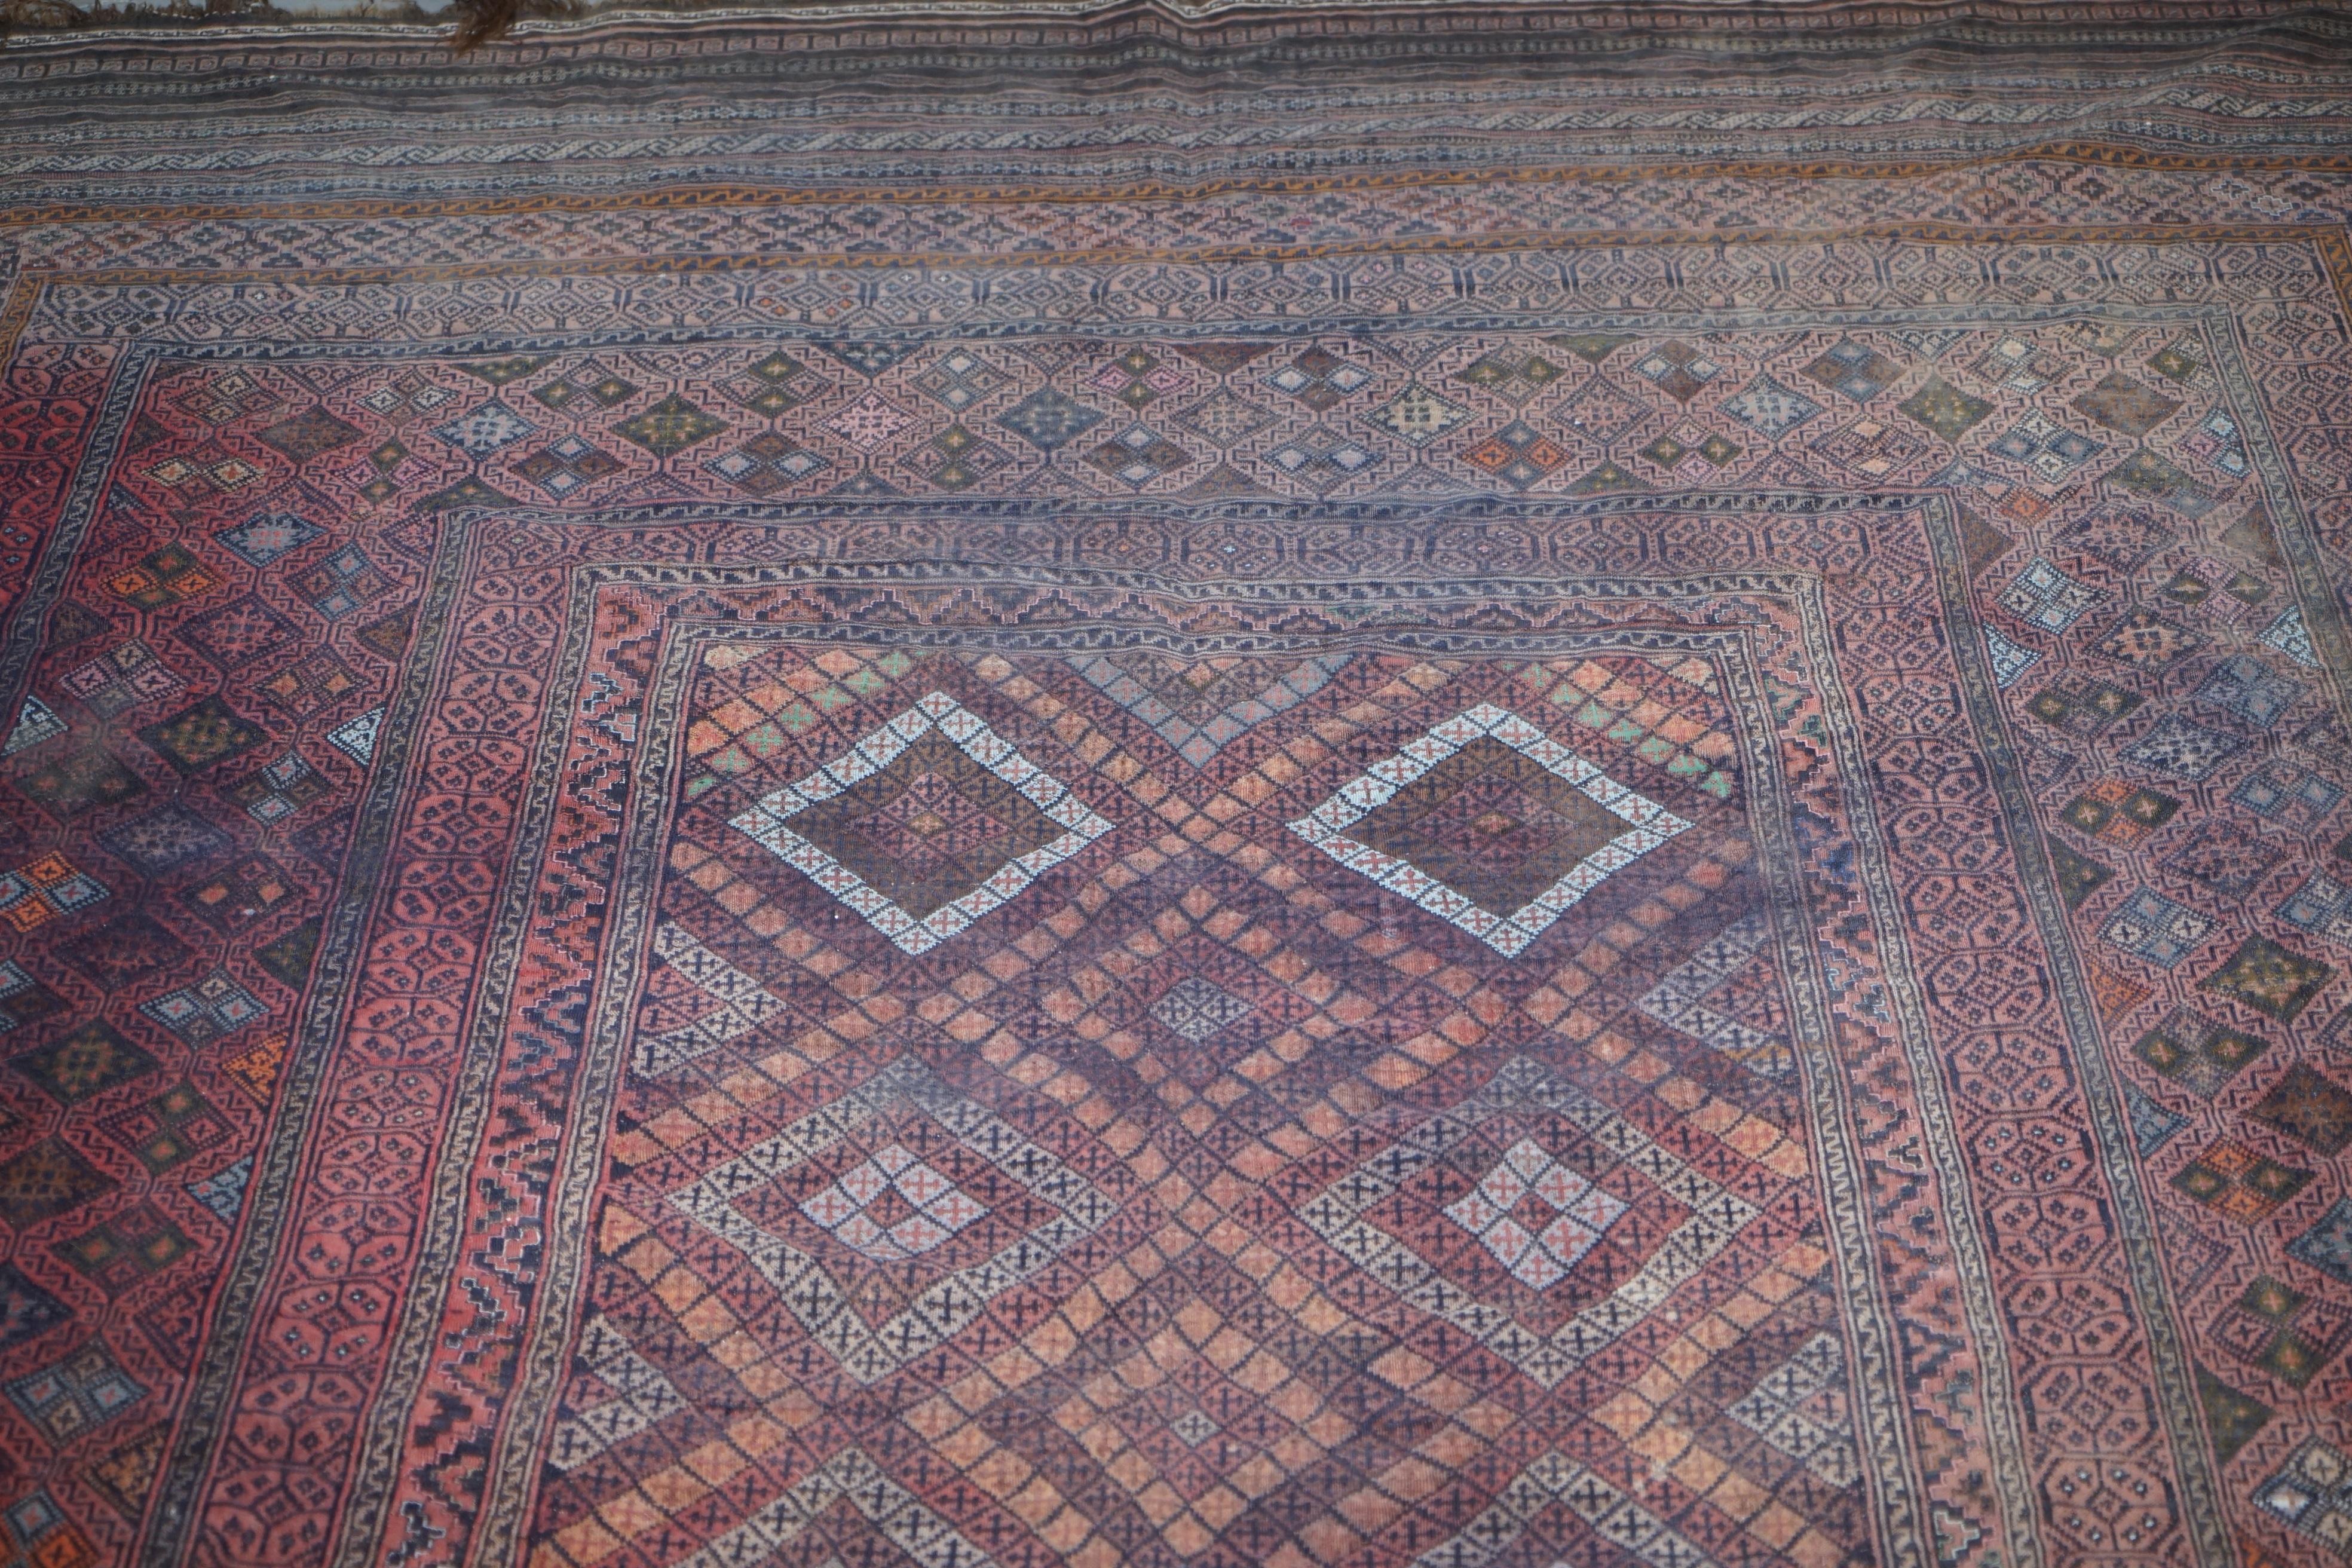 Very Old Worn Antique Kilim Large Floor Rug Hand Knotted and Woven 1